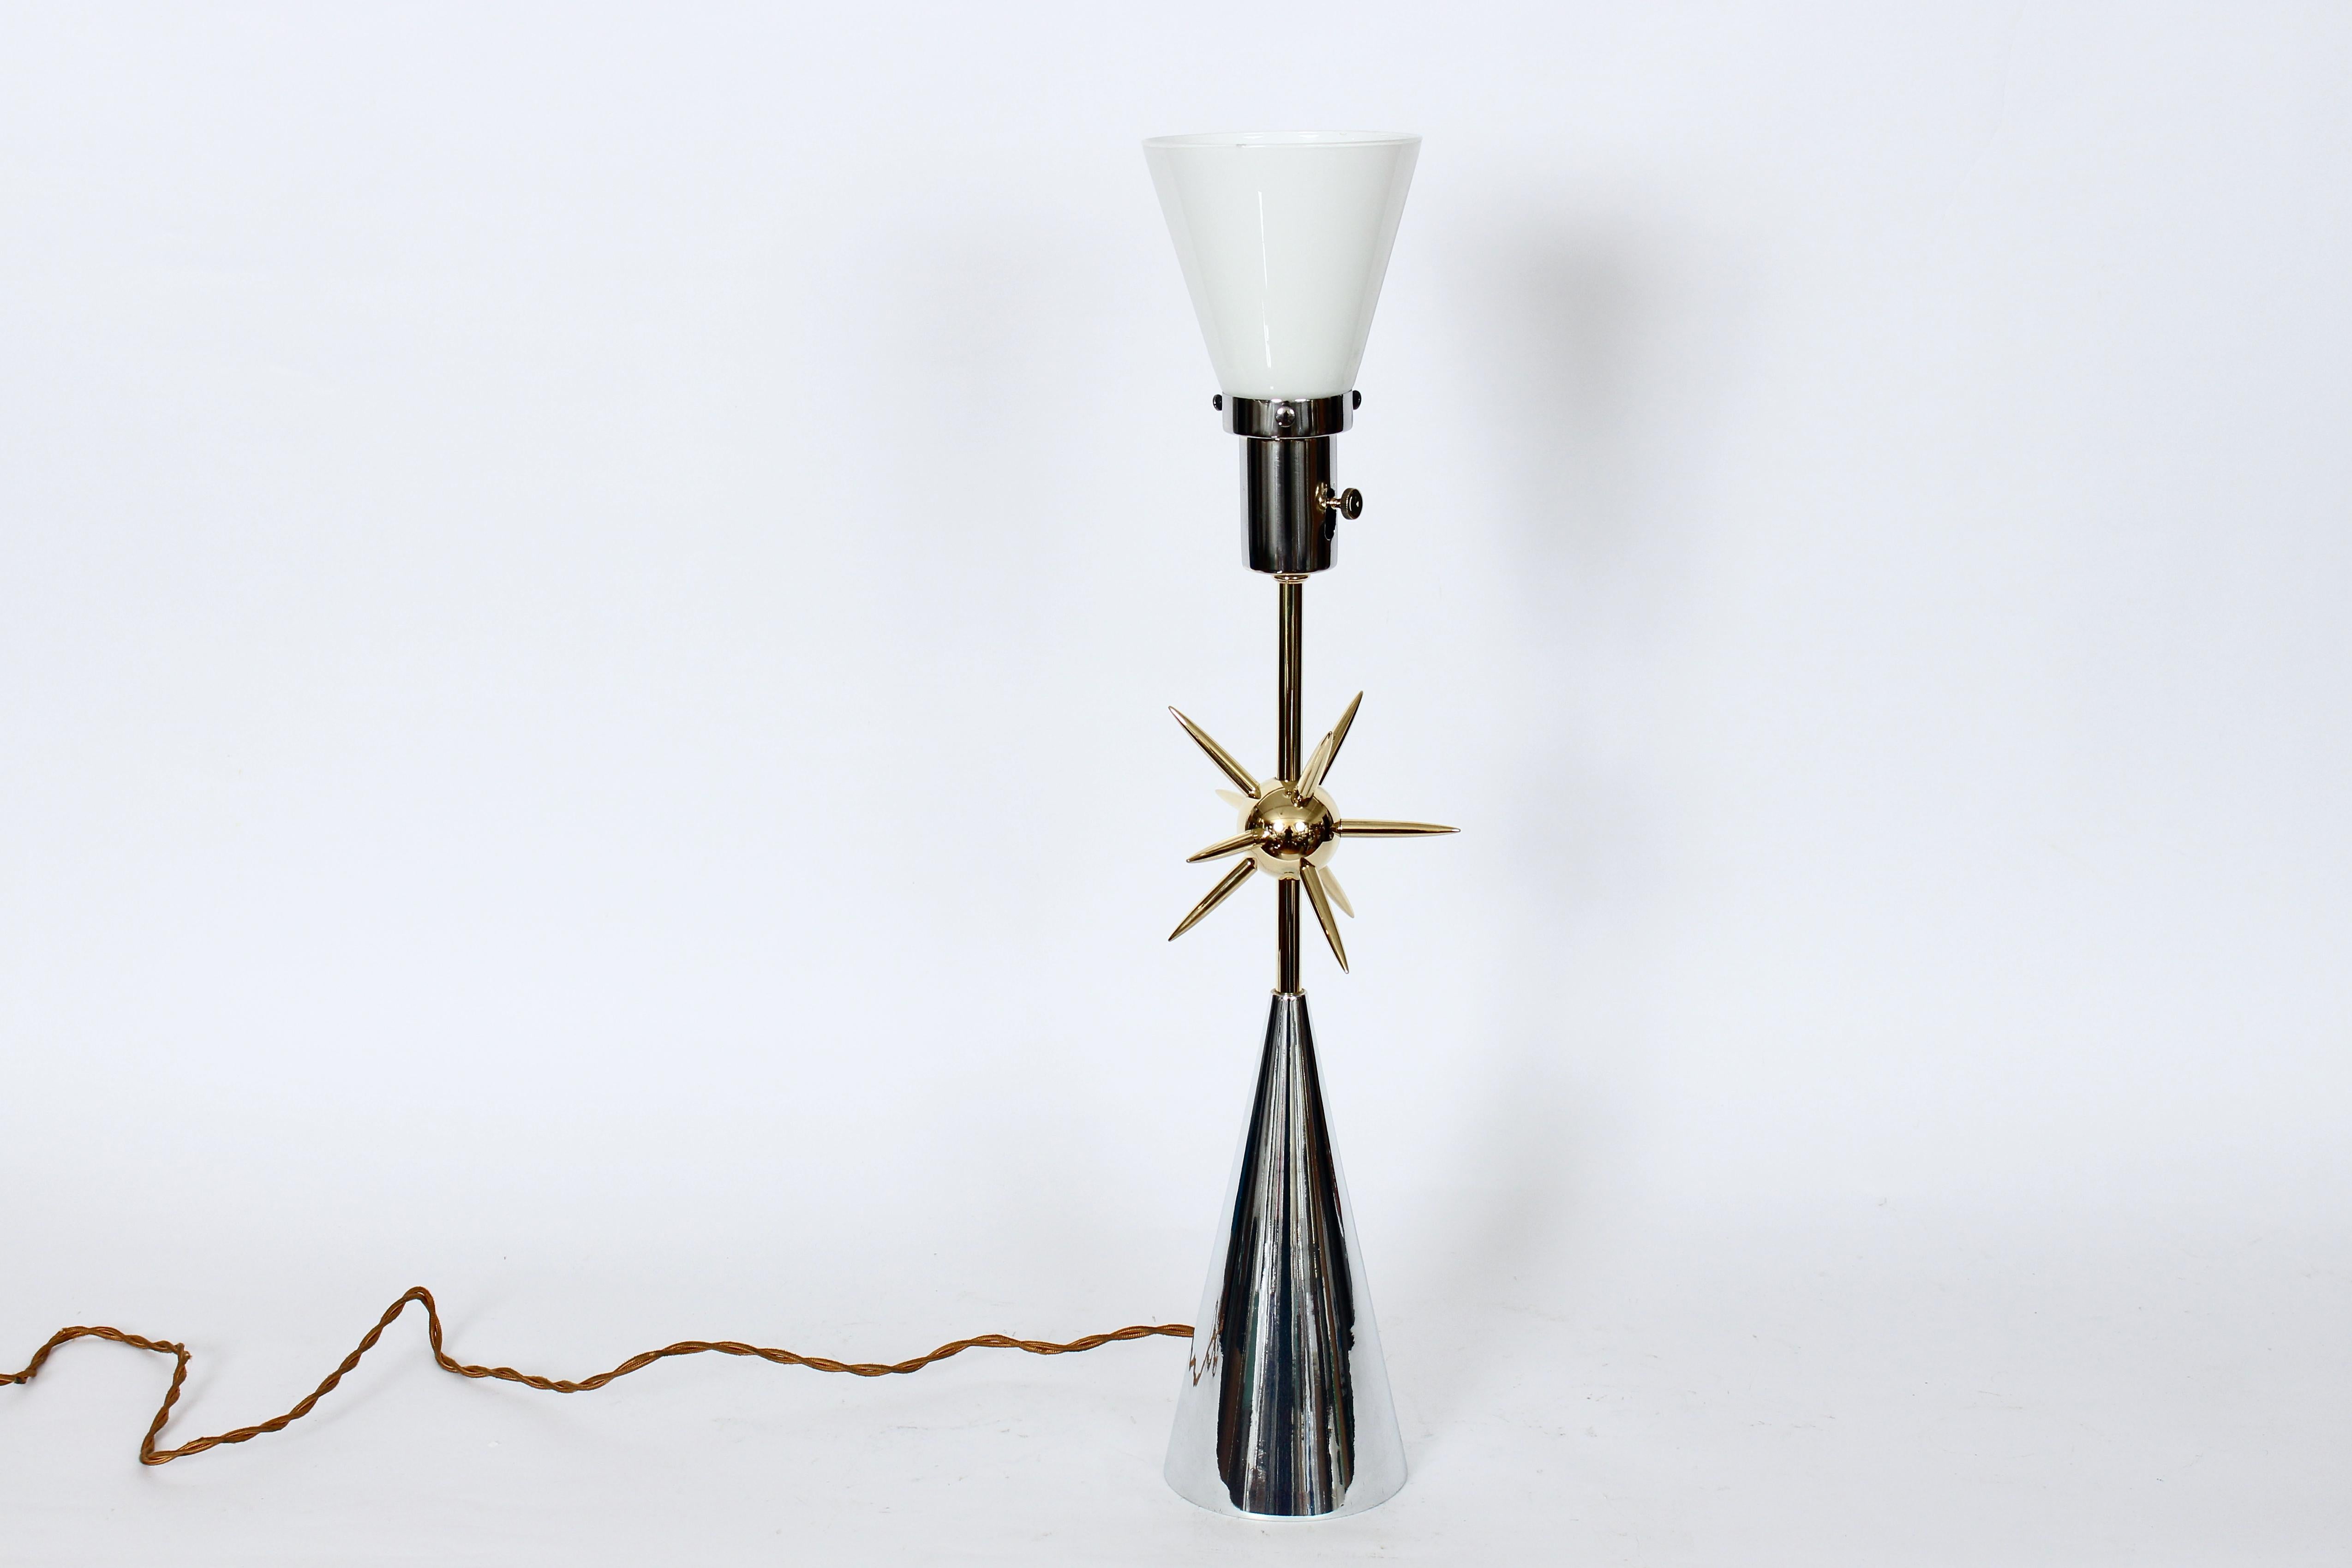 Plated Vintage Mutual Sunset Lamp Co. Atomic Sputnik Polished Metals Table Lamp, 1950's For Sale